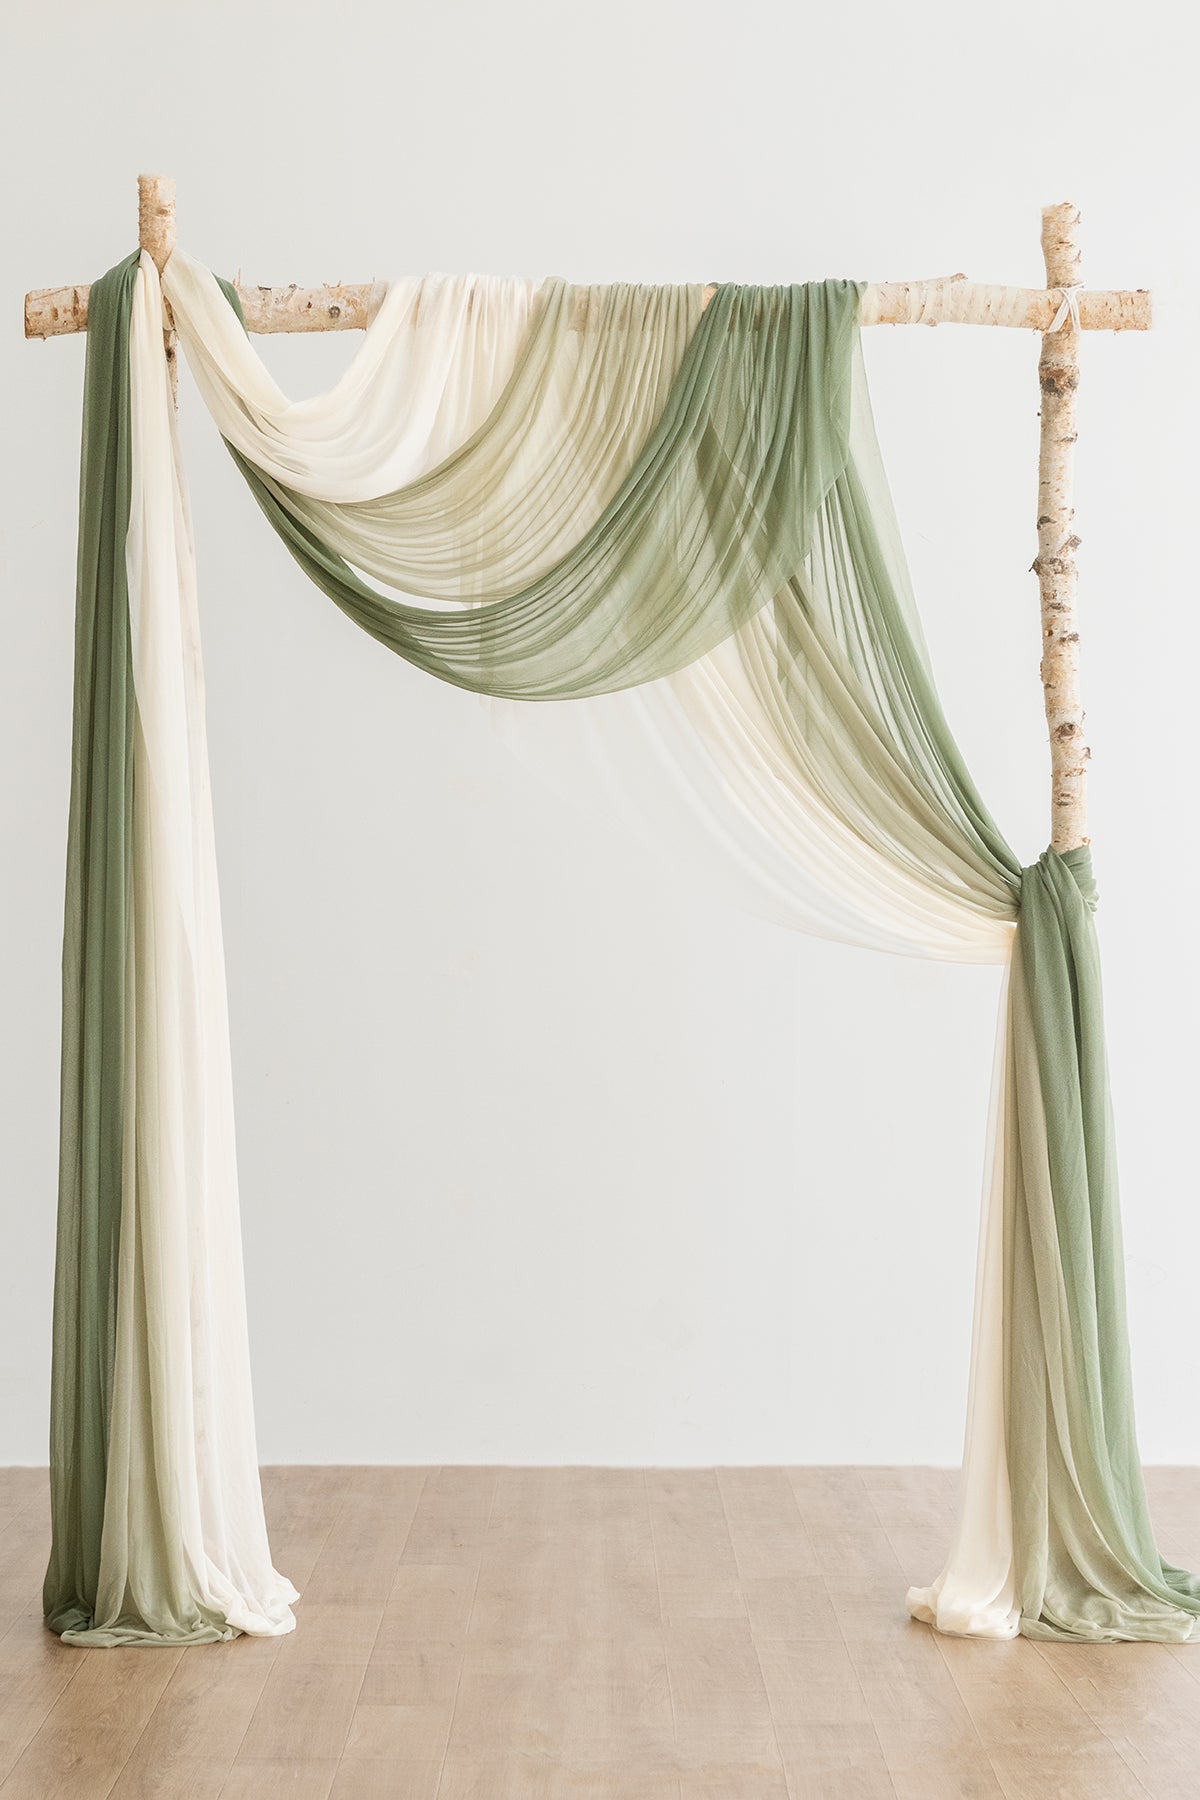 Easy Hanging Sheer Arch Draping (Set of 3) - 11 Colors